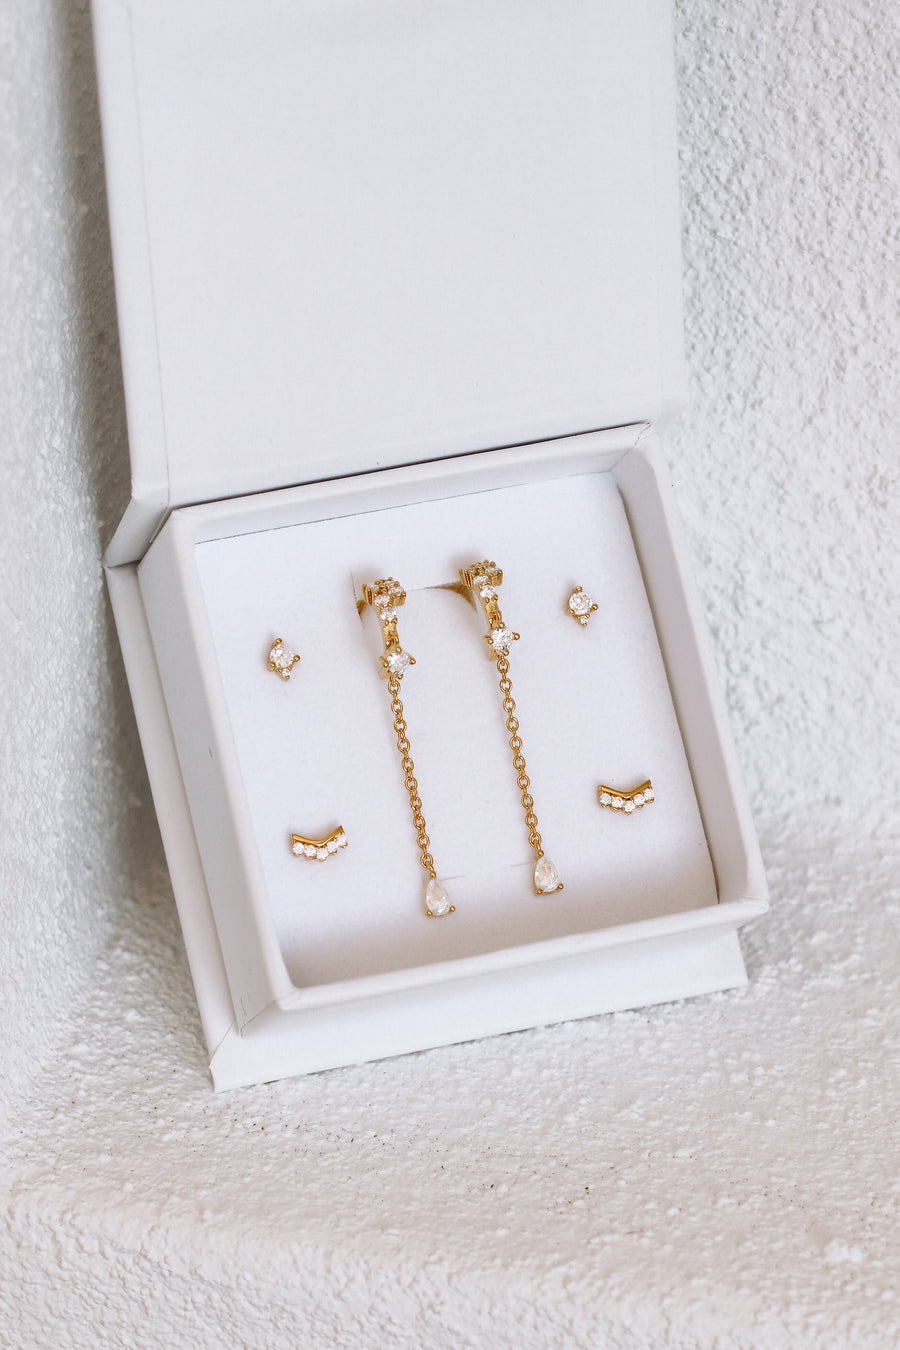 Eden Earring Stack - Gold or Silver Sterling Silver Studs